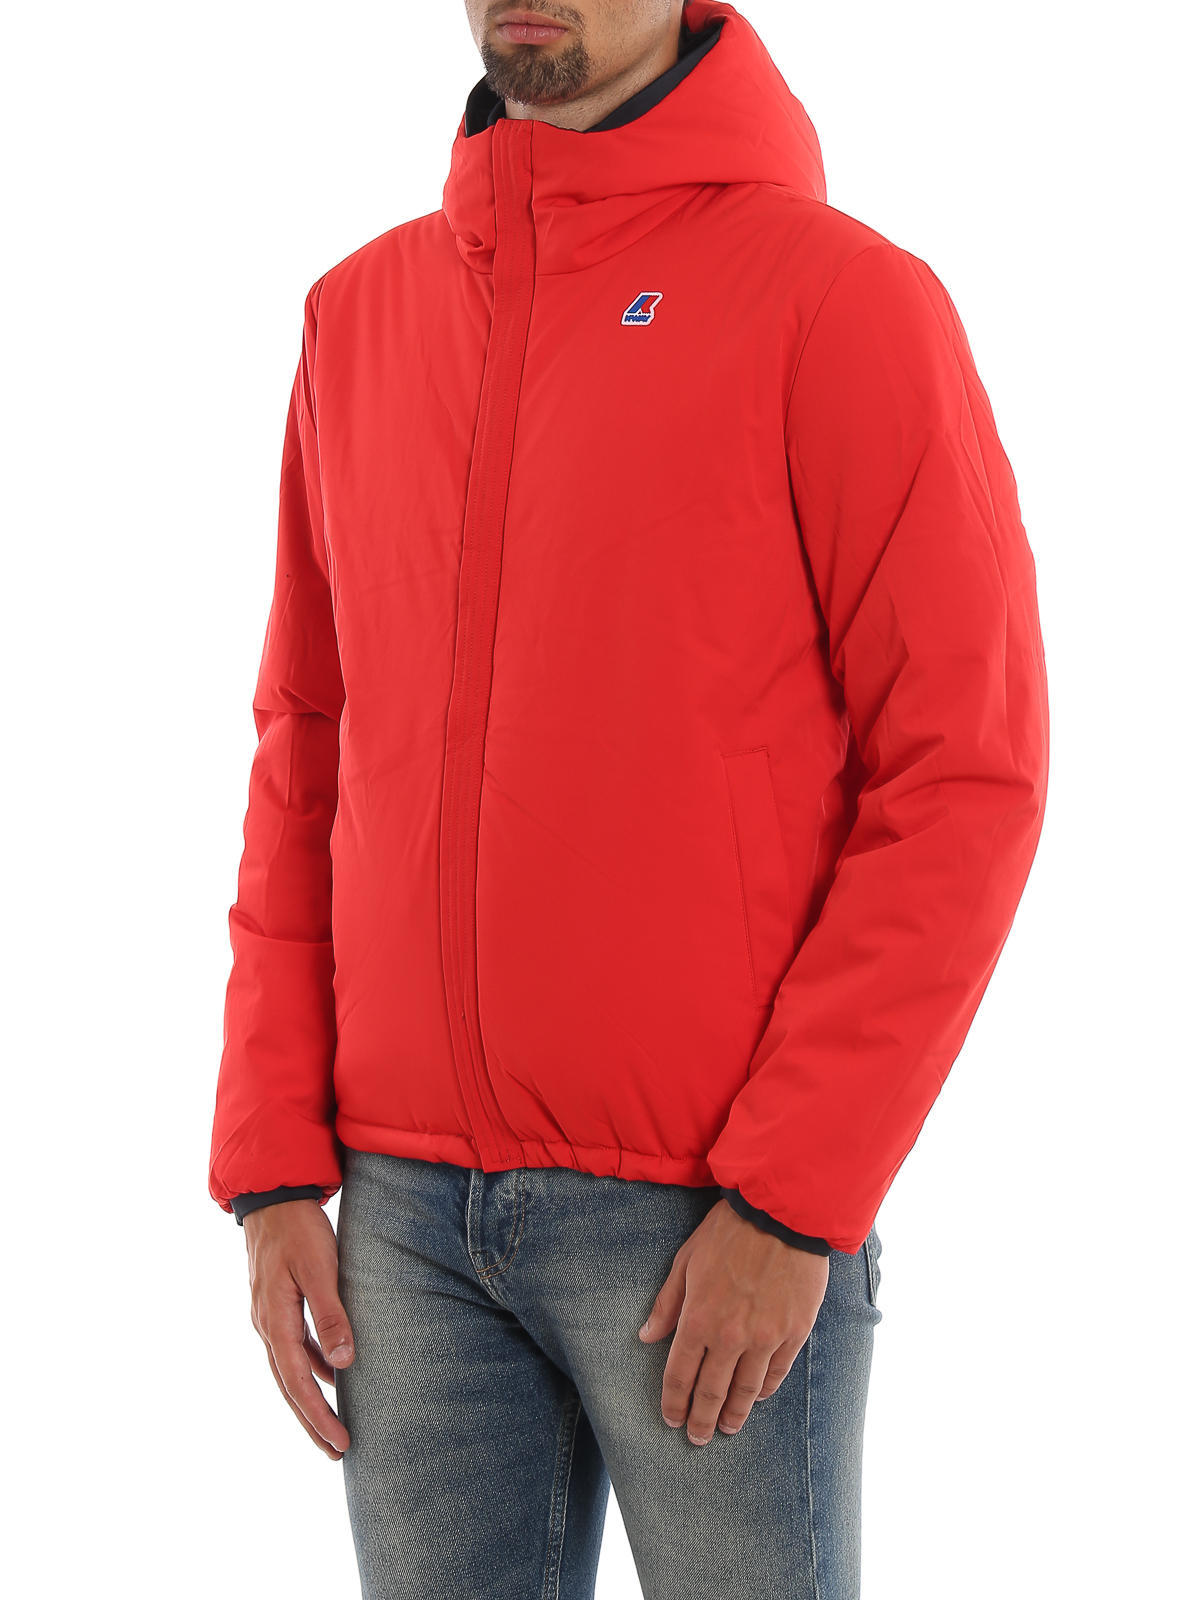 K-way - Jacques Warm Double red reversible jacket - padded jackets ...